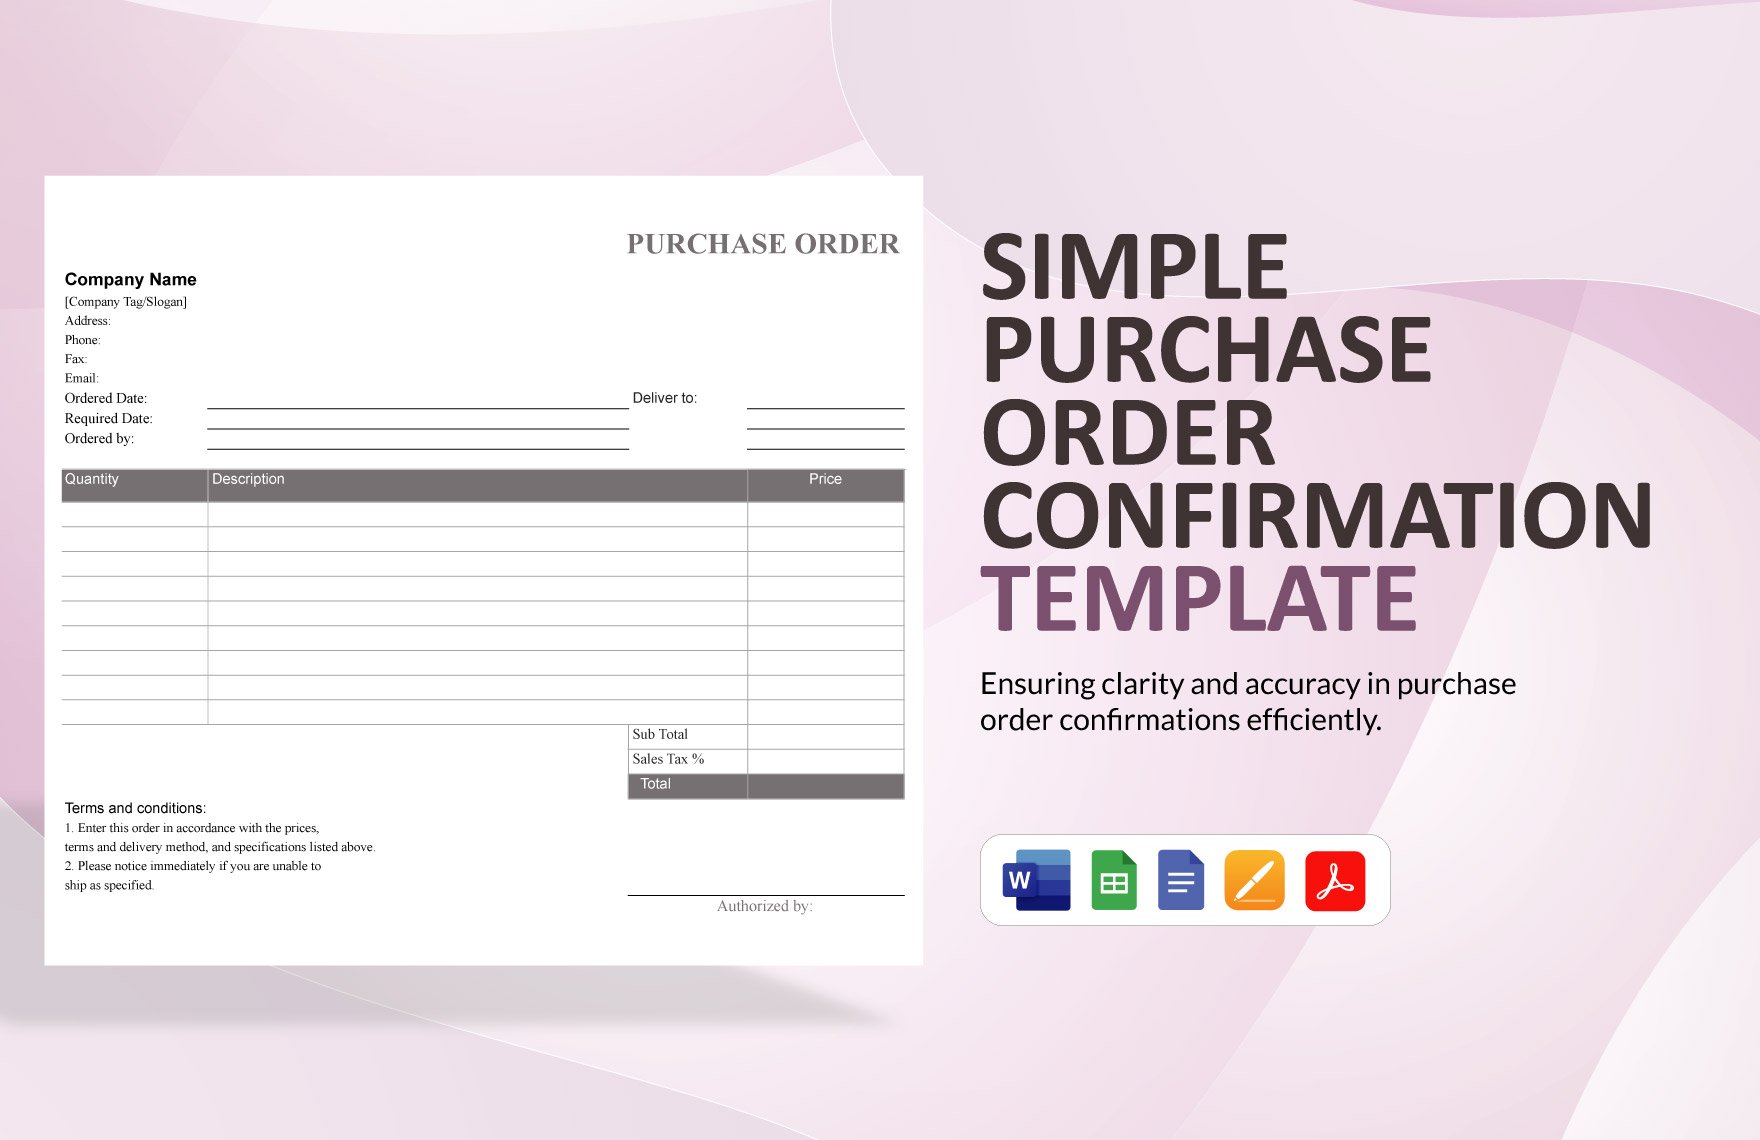 Simple Purchase Order Confirmation Template in Word, Google Docs, PDF, Google Sheets, Apple Pages